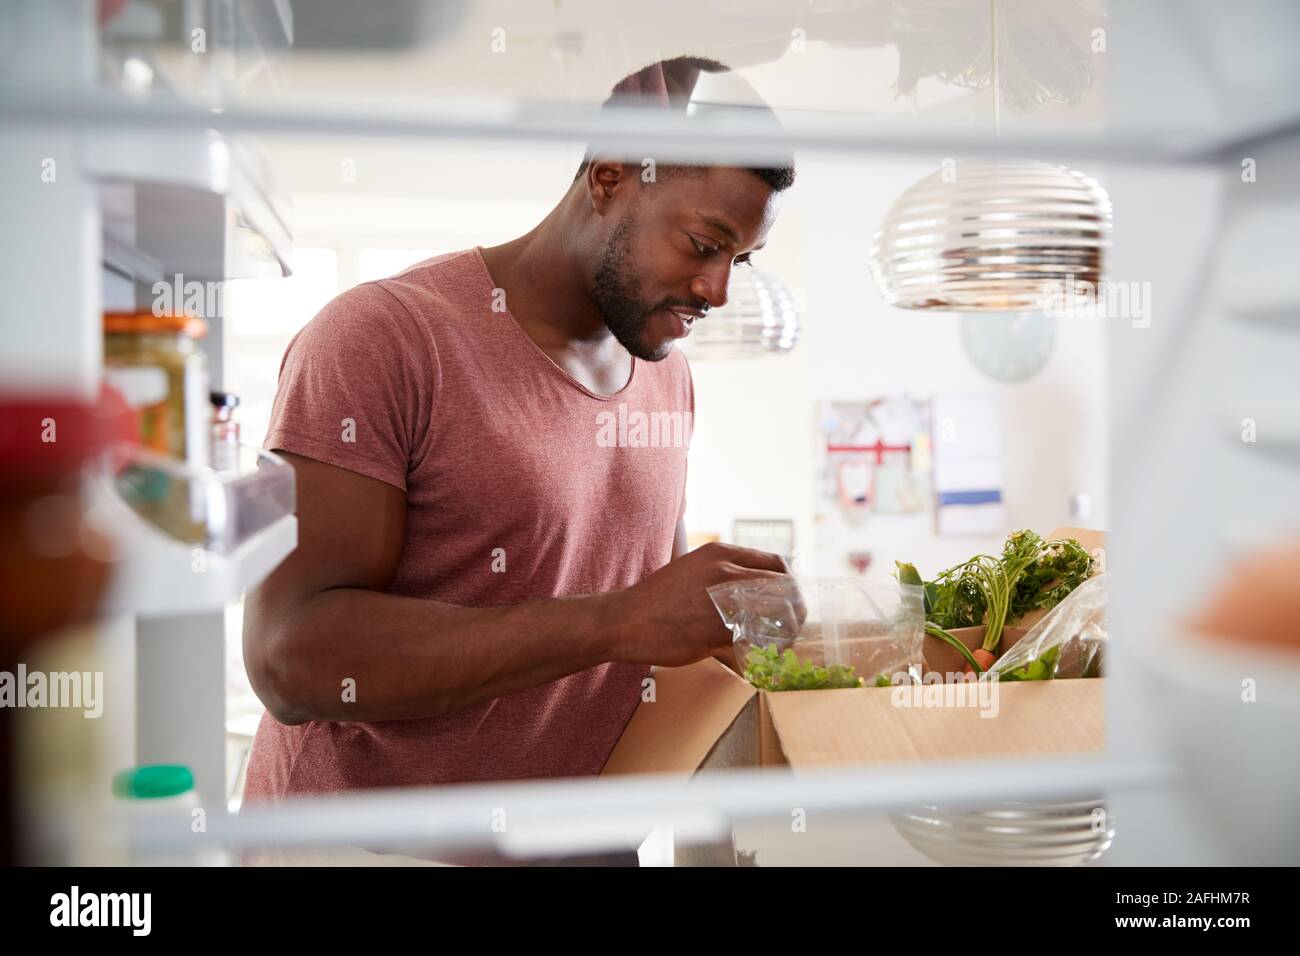 View Looking Out From Inside Of Refrigerator As Man Unpacks Online Home Food Delivery Stock Photo